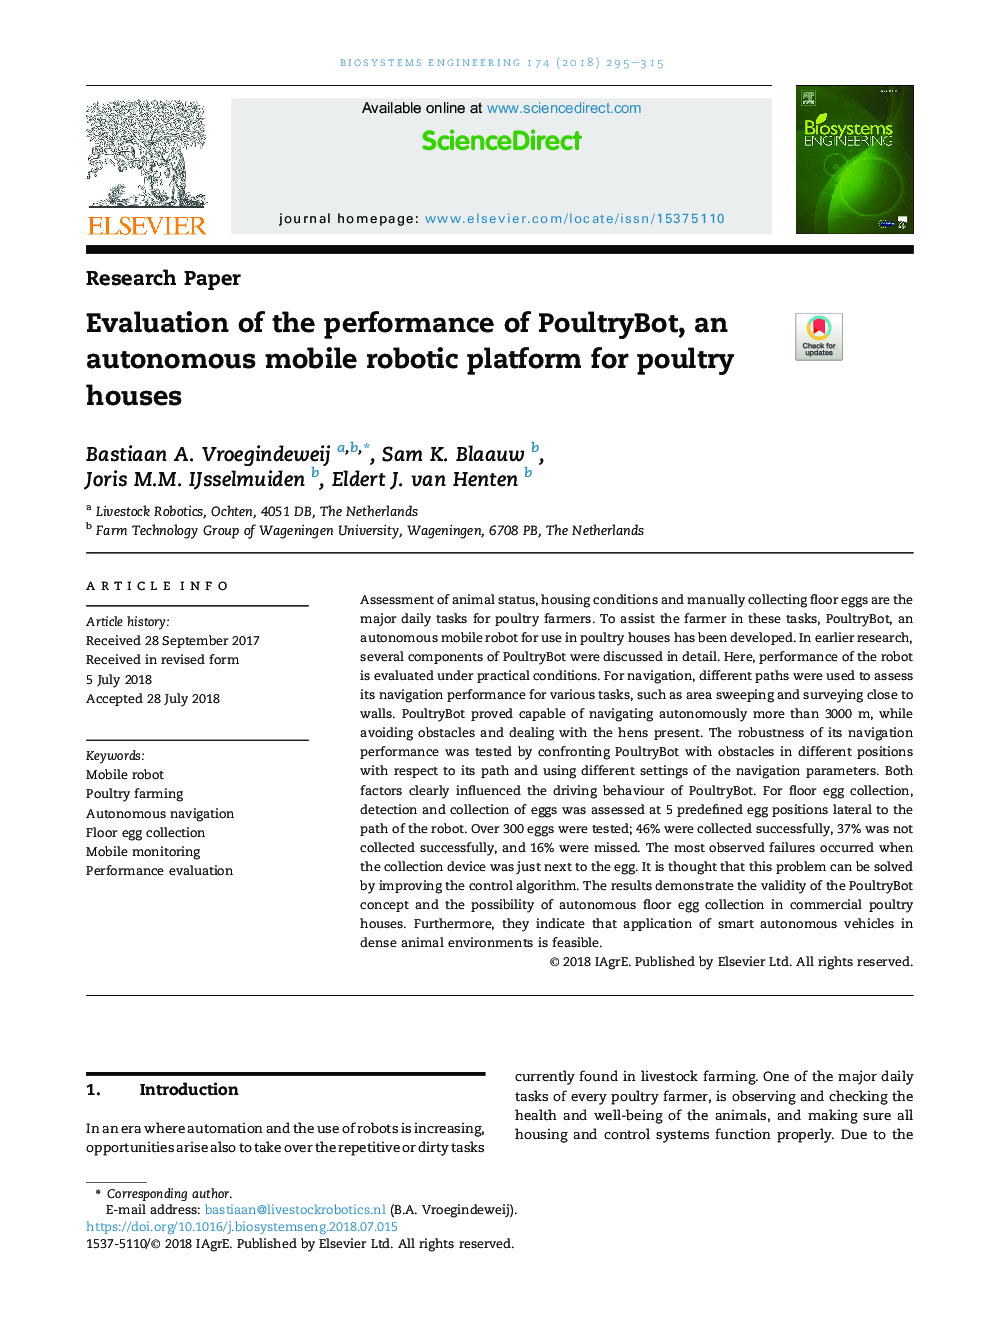 Evaluation of the performance of PoultryBot, an autonomous mobile robotic platform for poultry houses